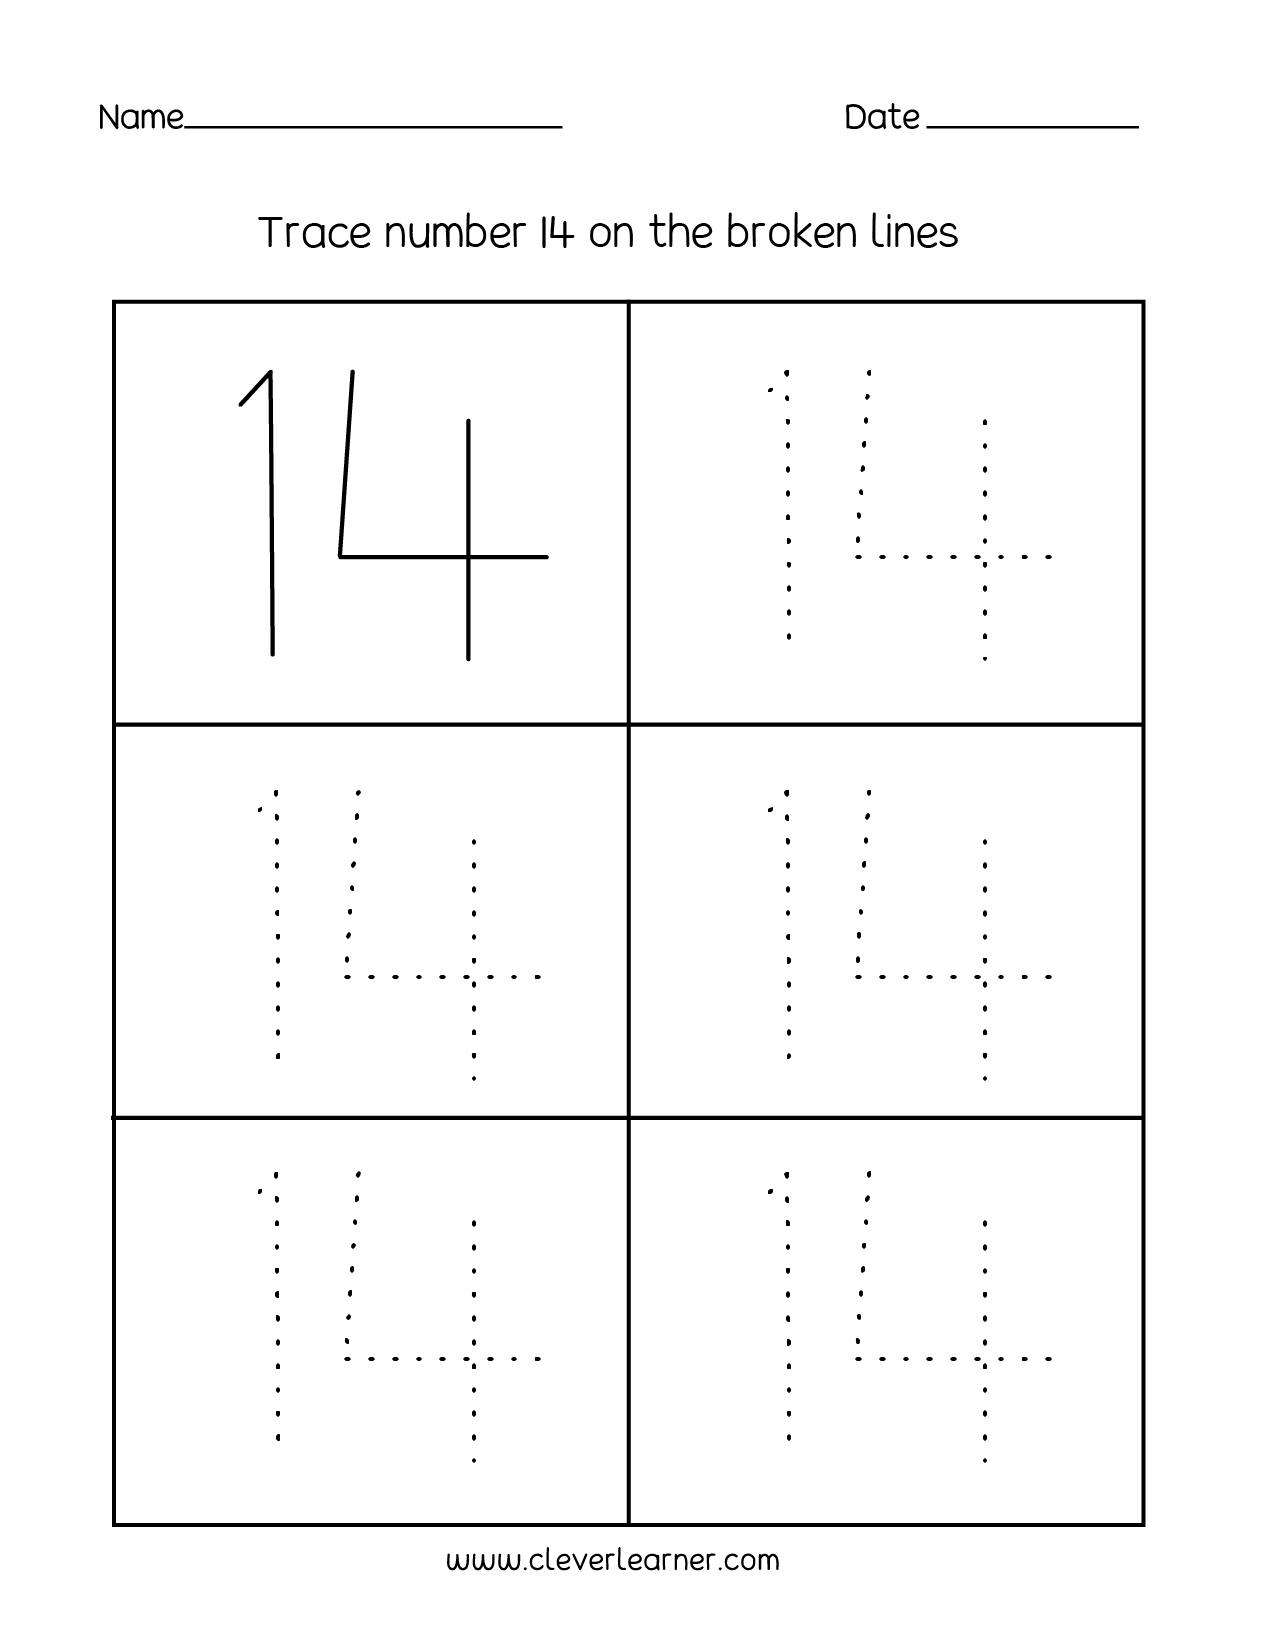 number-14-writing-counting-and-identification-printable-worksheets-for